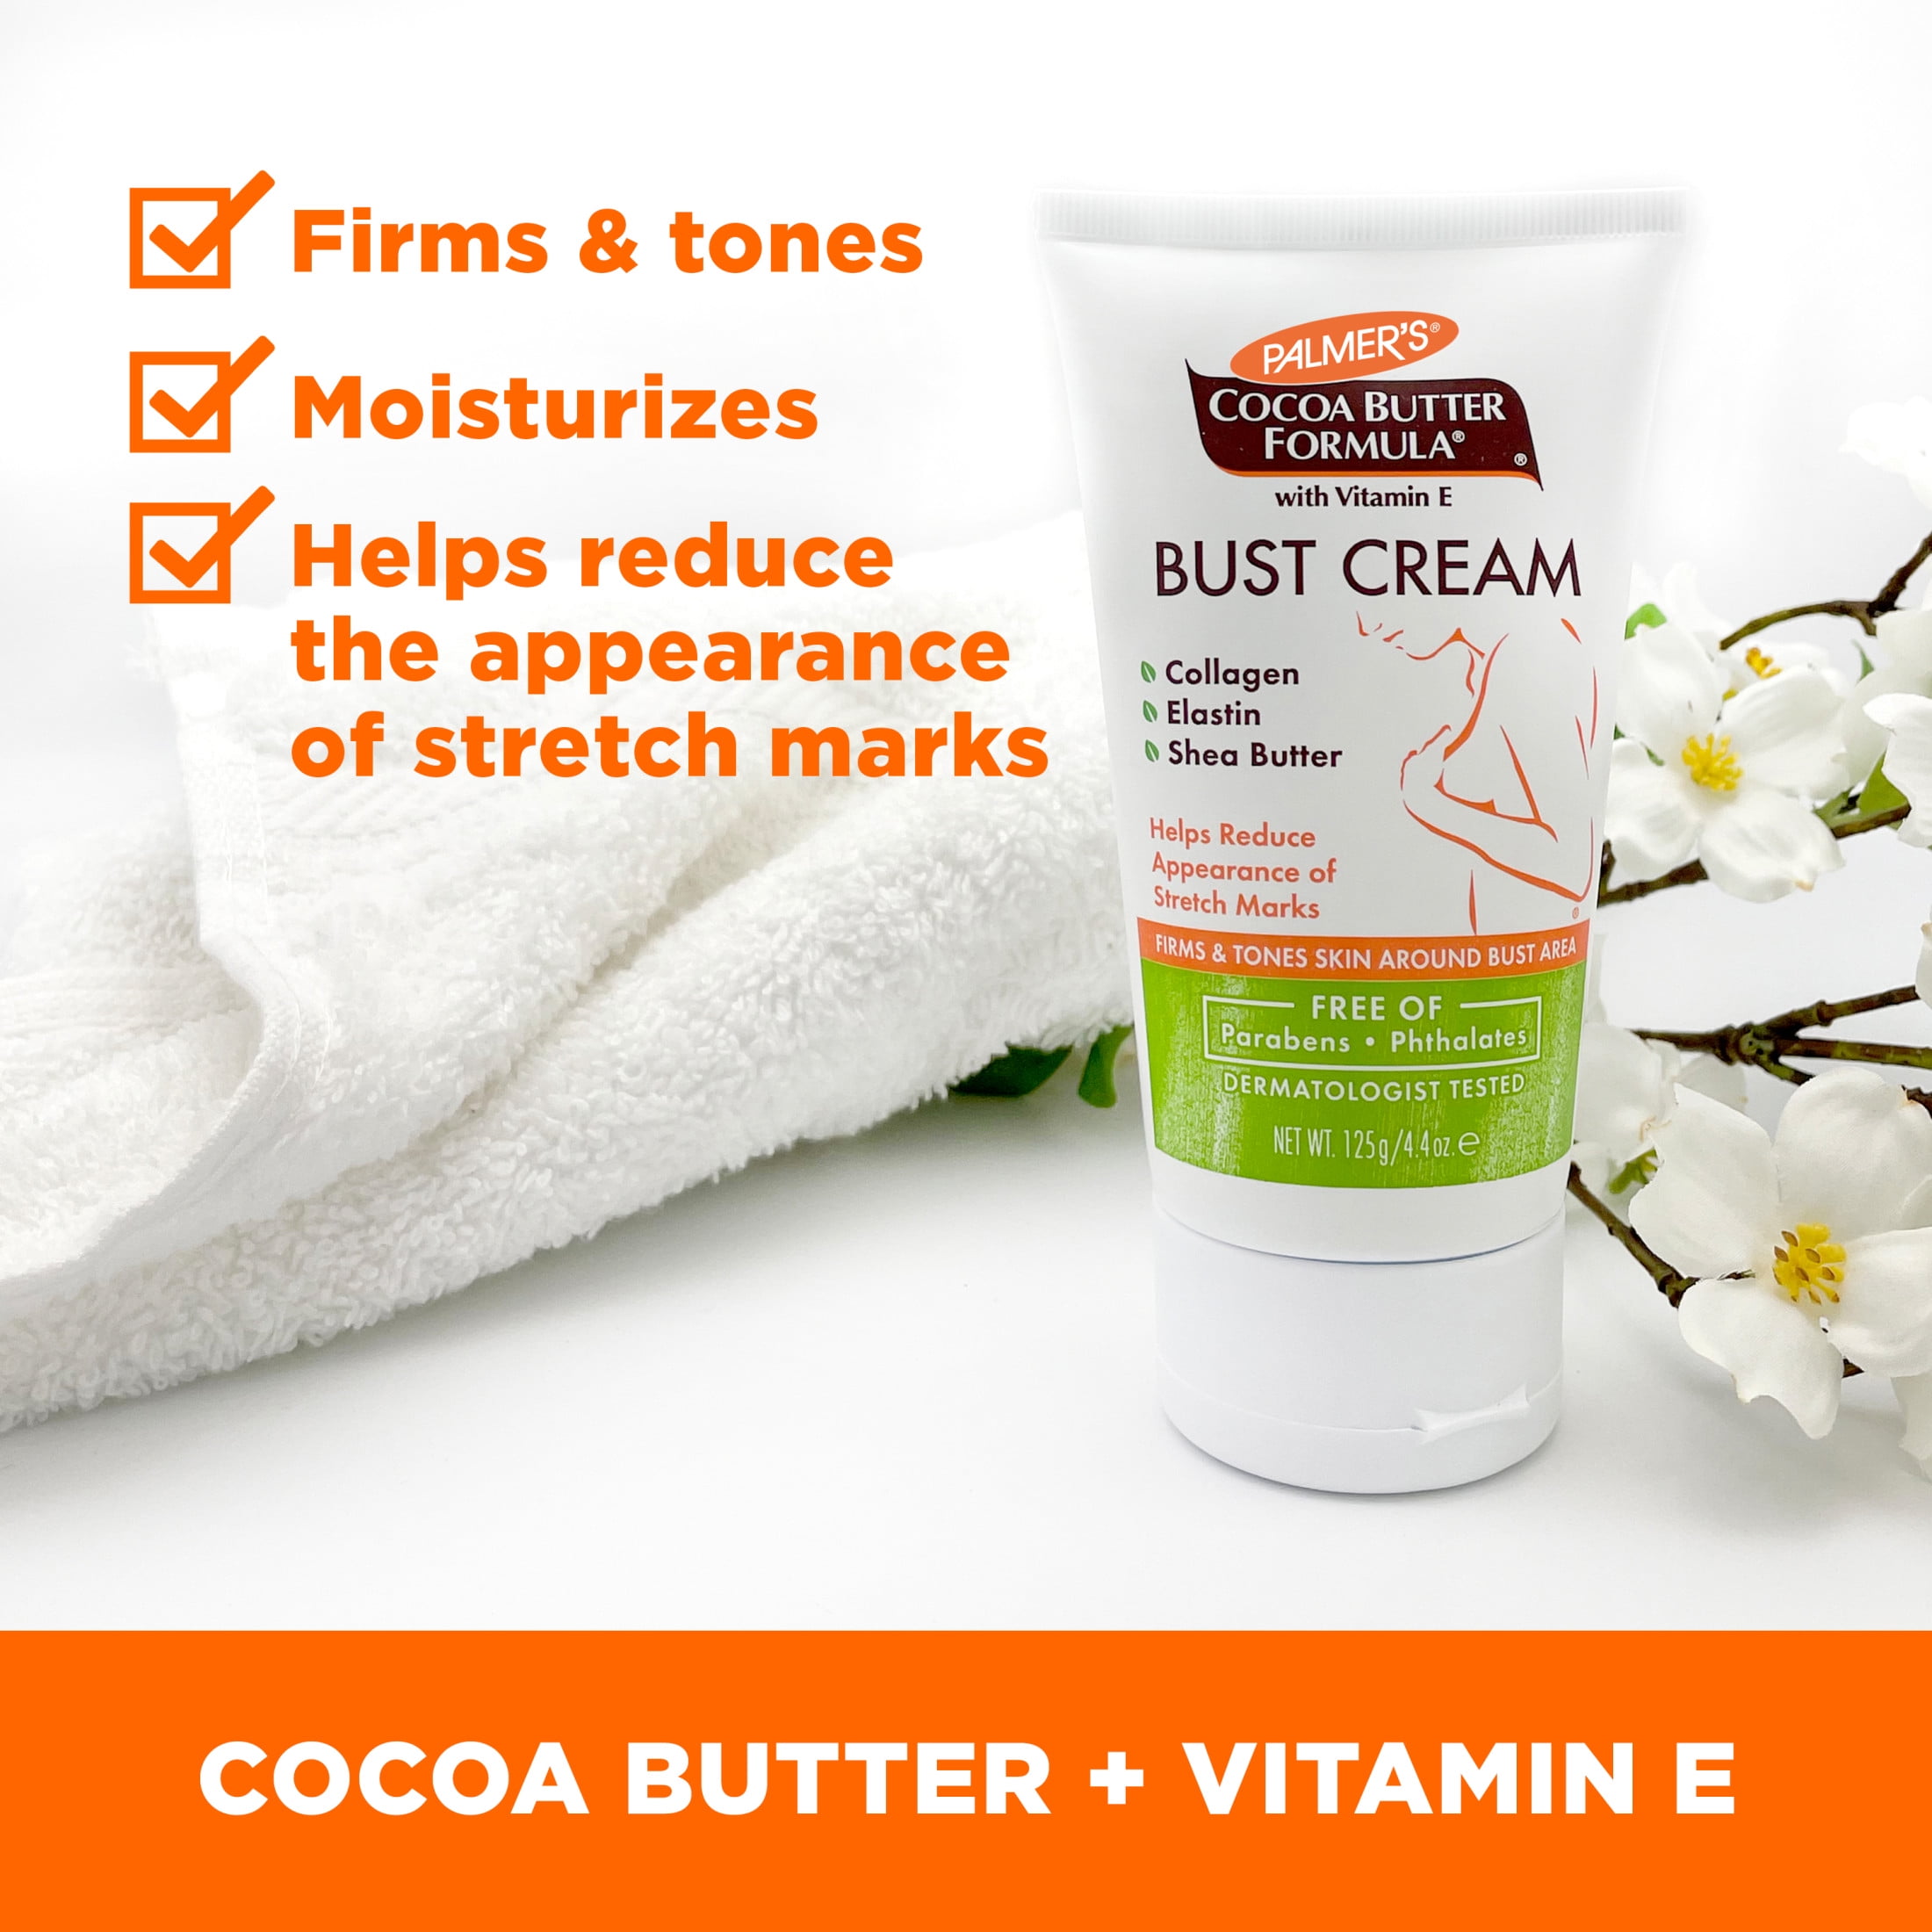 Palmer's Cocoa Butter Formula New Moms Post-Pregnancy Skin Recovery Kit